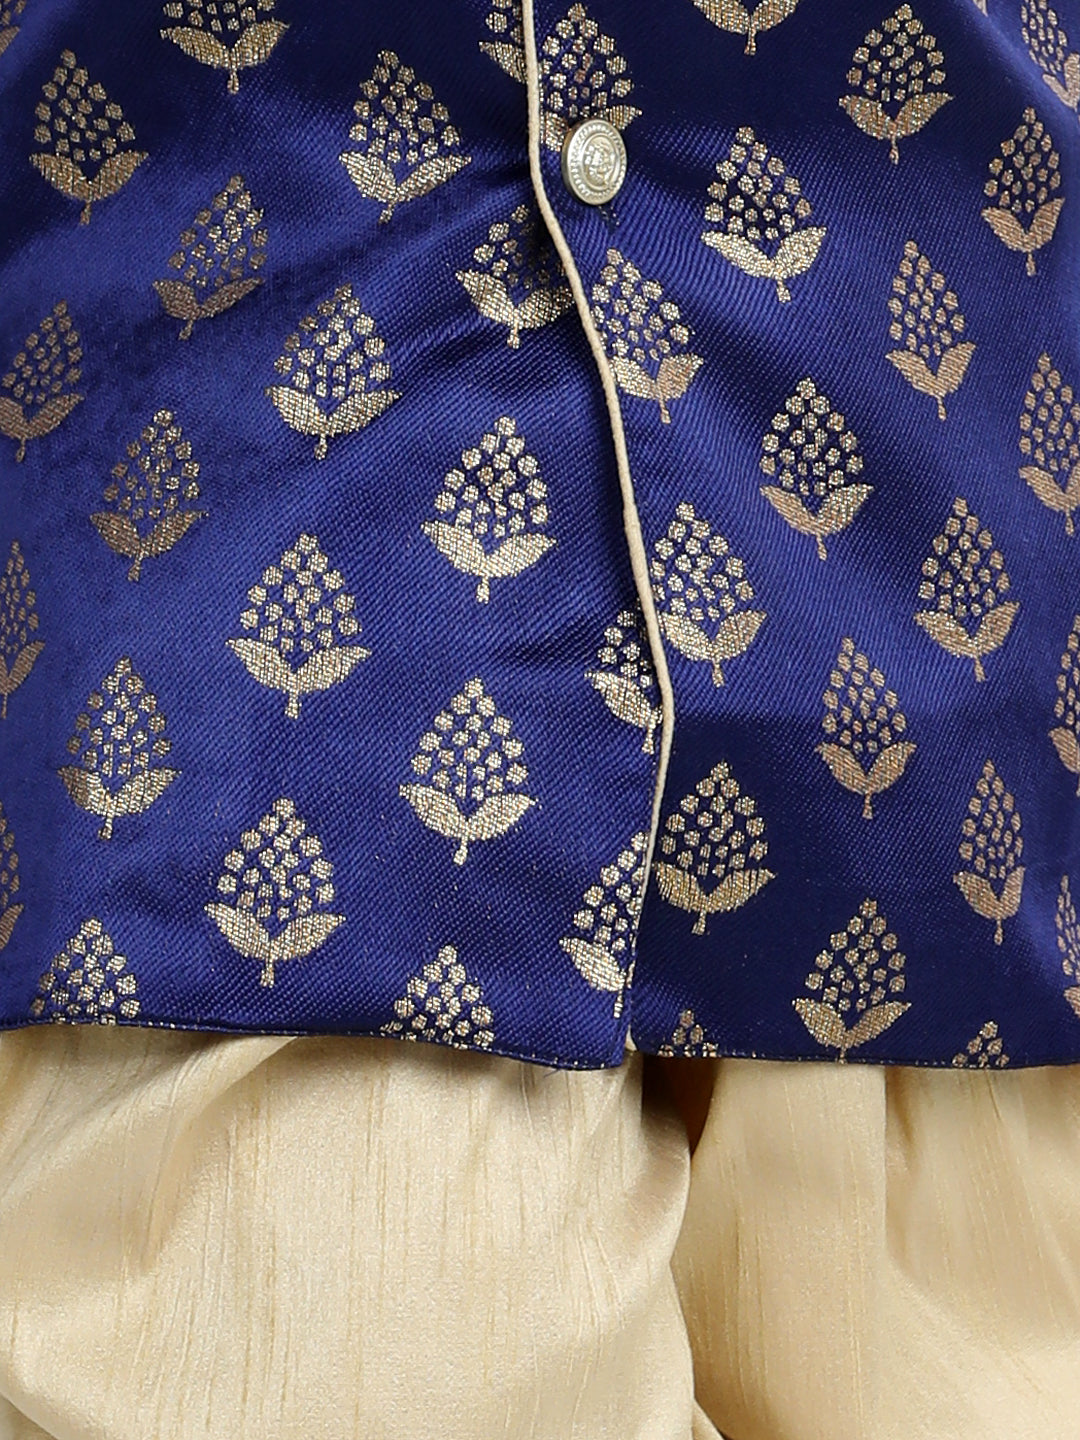 BownBee Sibling set Full Sleeve Jacquard Sherwani and Jacquard Top and Dhoti with attached Dupatta-Blue